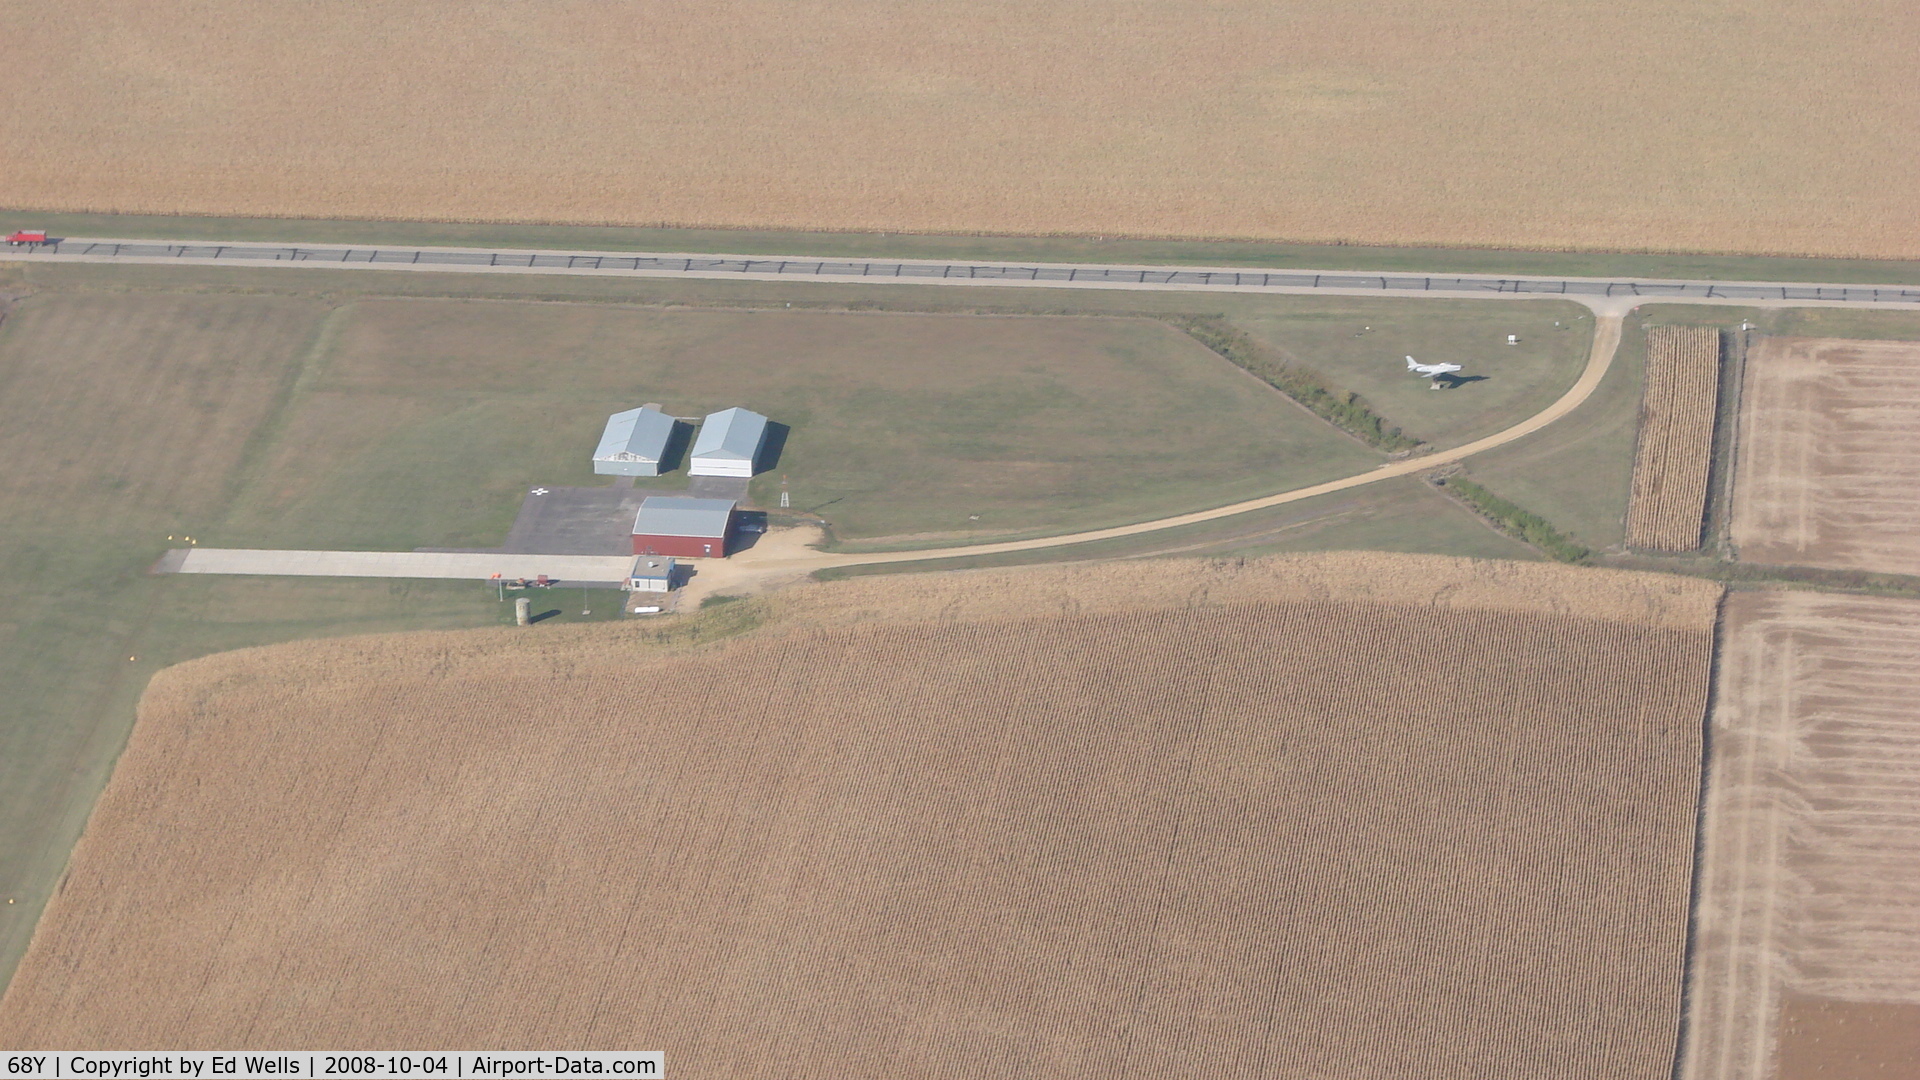 Wells Municipal Airport (68Y) - 68Y Wells Airport